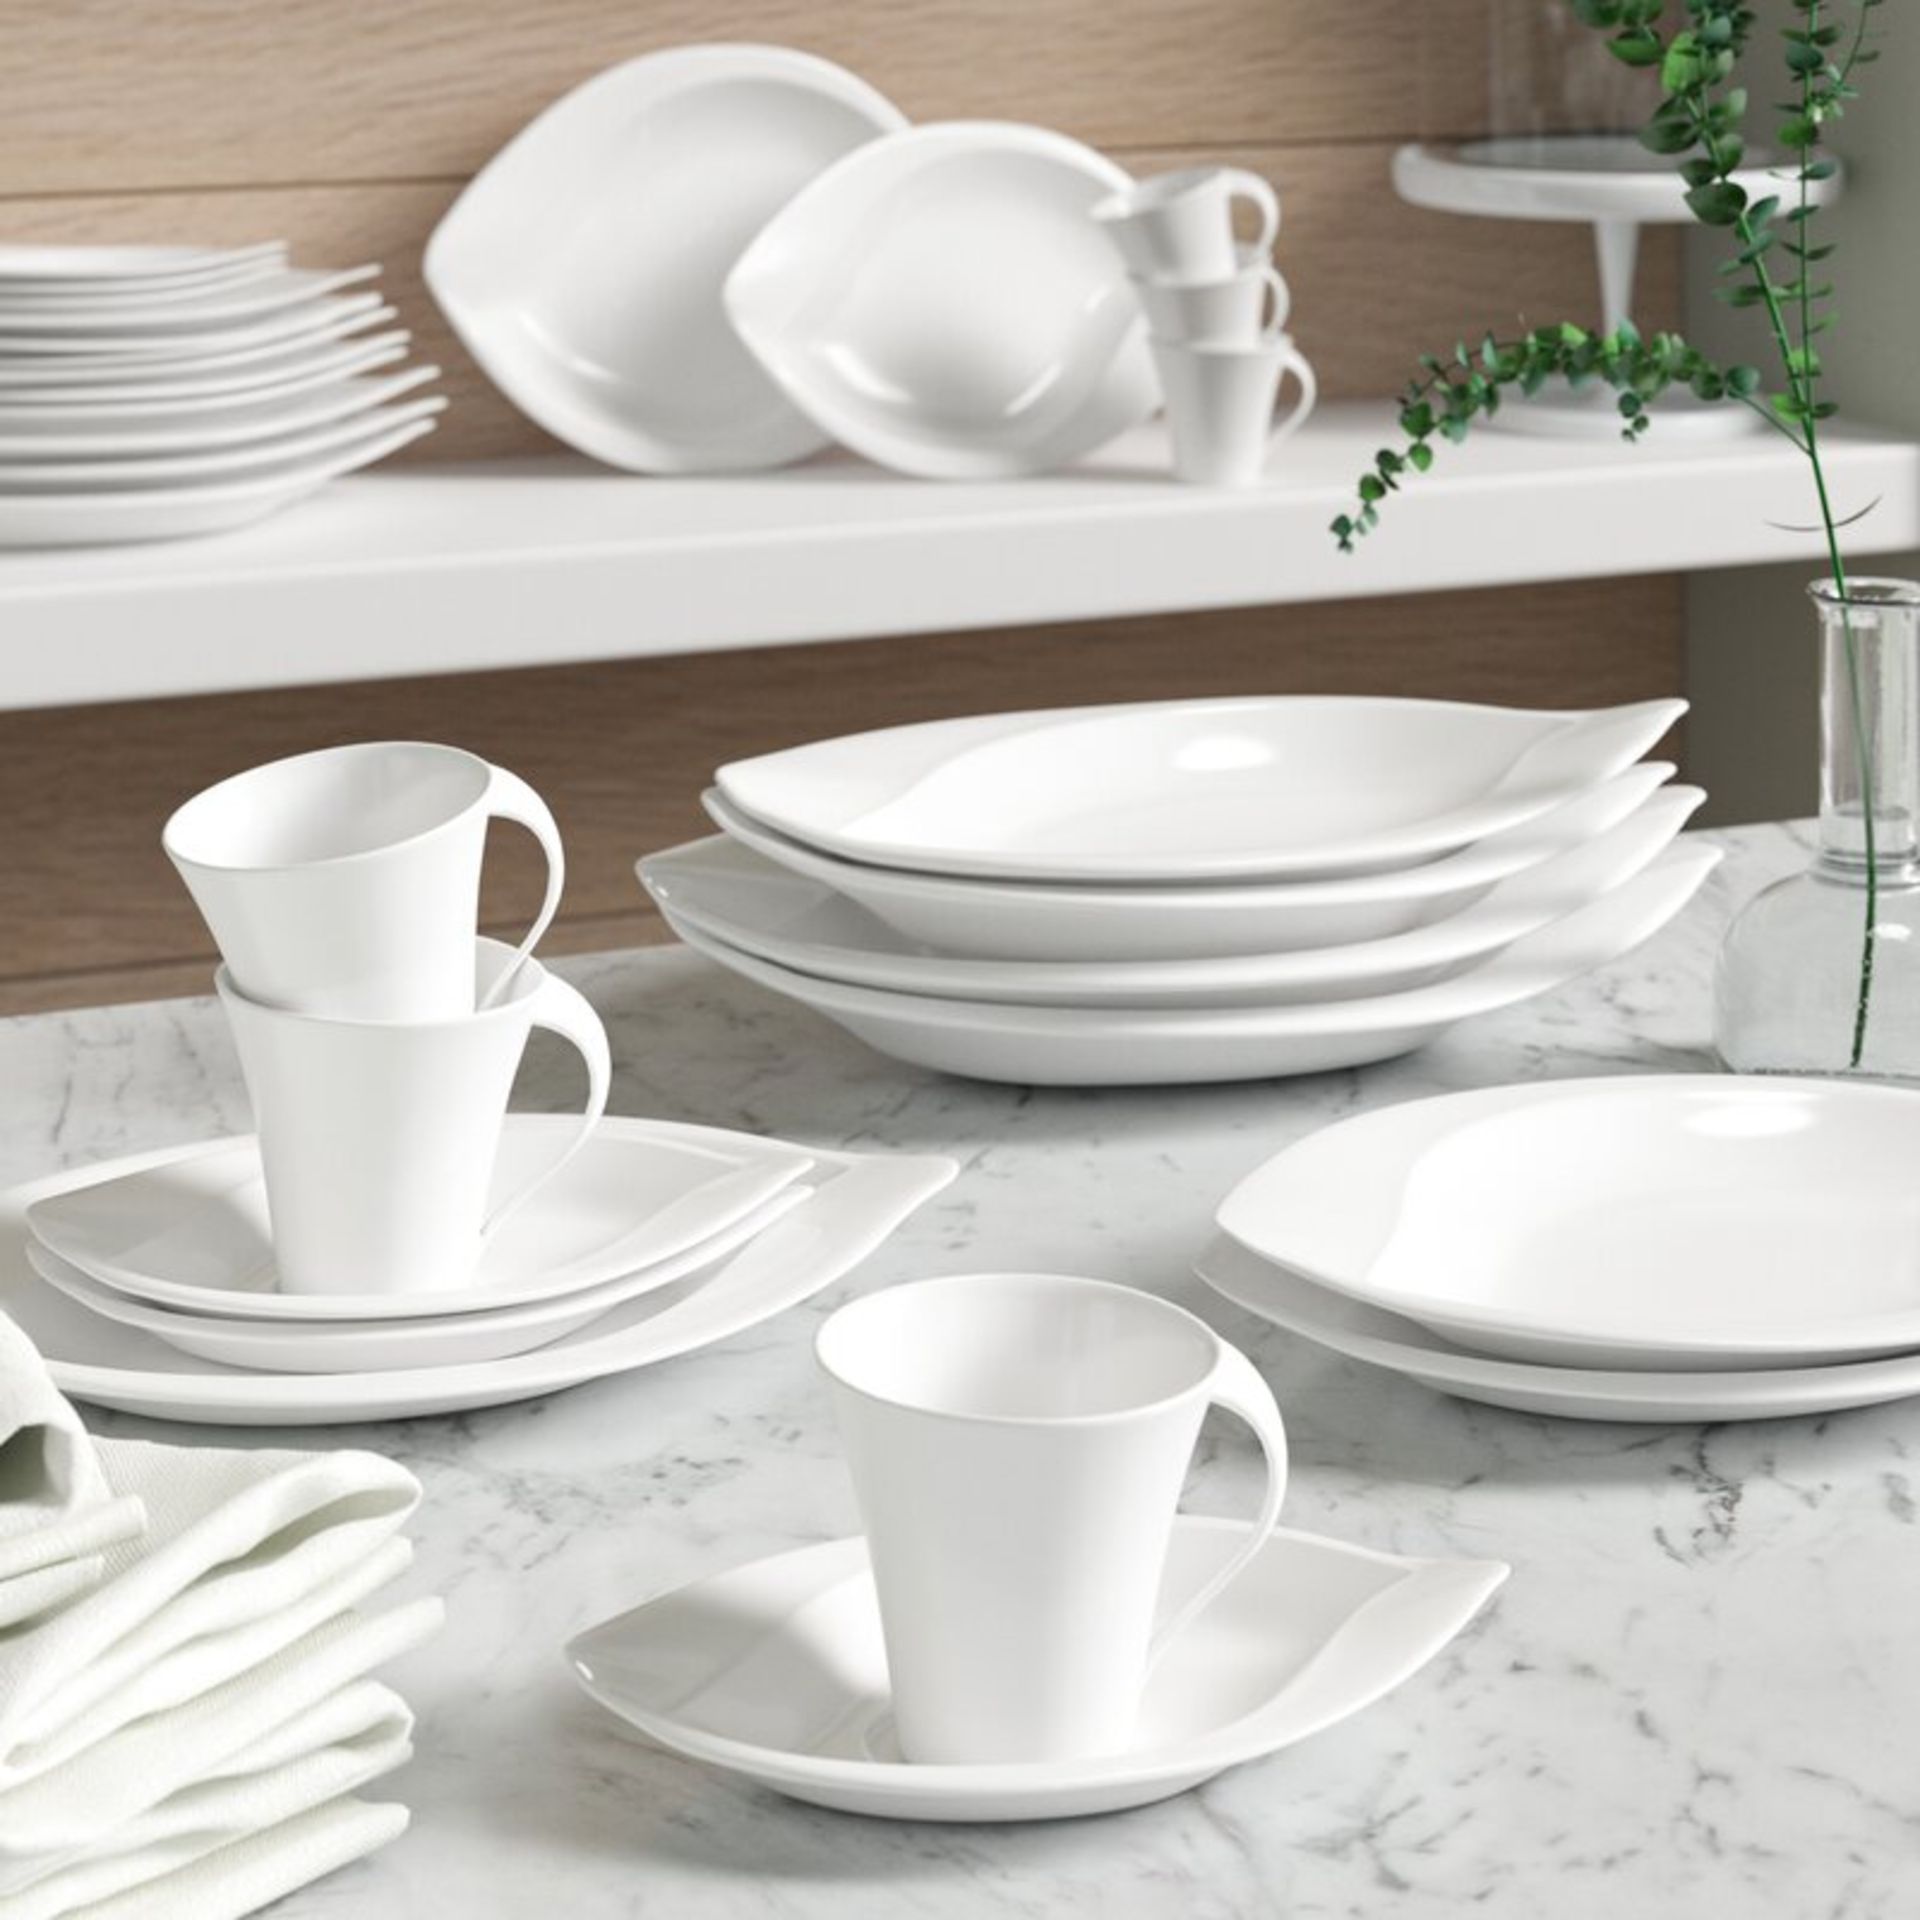 Owings 30 Piece Dinnerware Set, Service for 6 - RRP £139.99